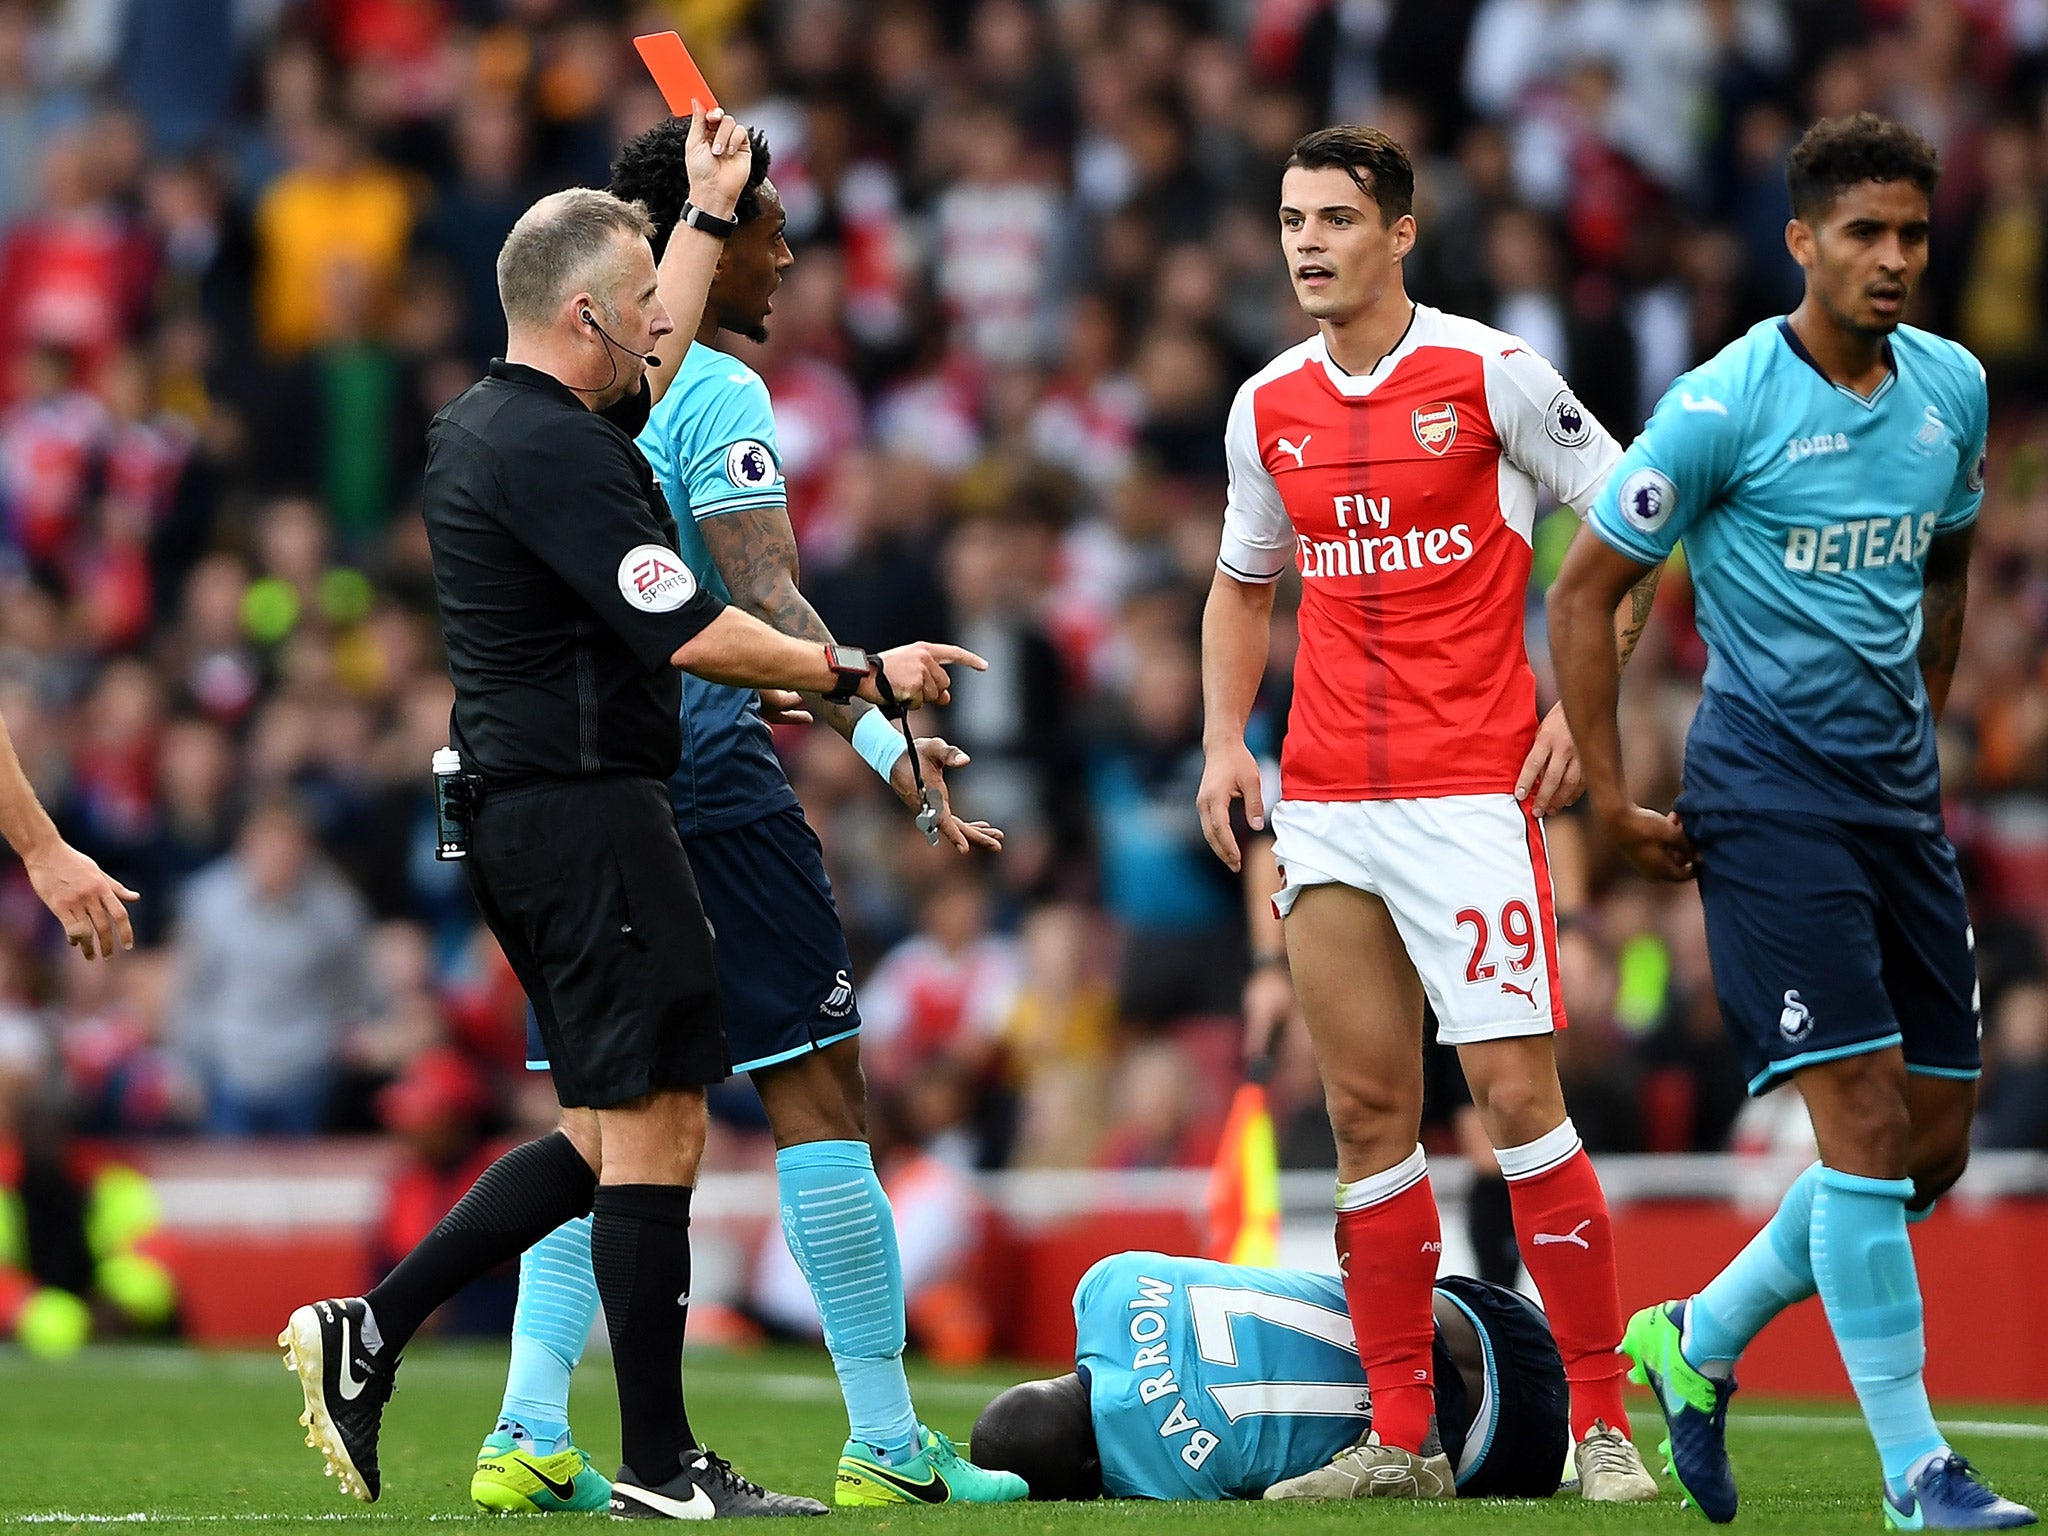 Granit Xhaka has been sent off eight times in 30 months for Arsenal, Borussia Monchengladbach and Switzerland